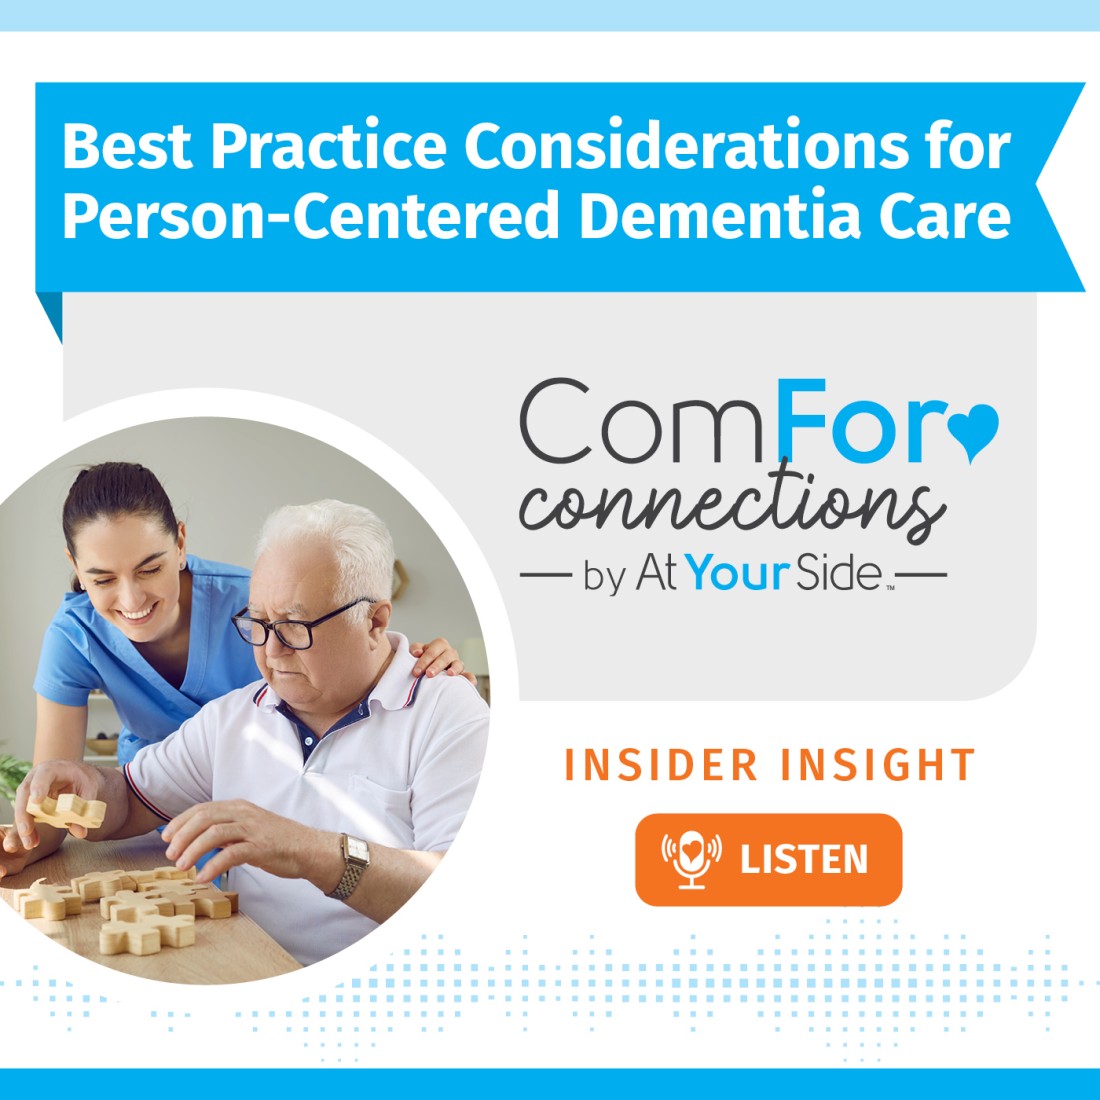 Podcast Resources: Expanding Your Home Care Knowledge - AYS_Social_Media__Best_Practice_Considerations_for_Person-Centered_Dementia_Care_SM_1400x1400_(1)